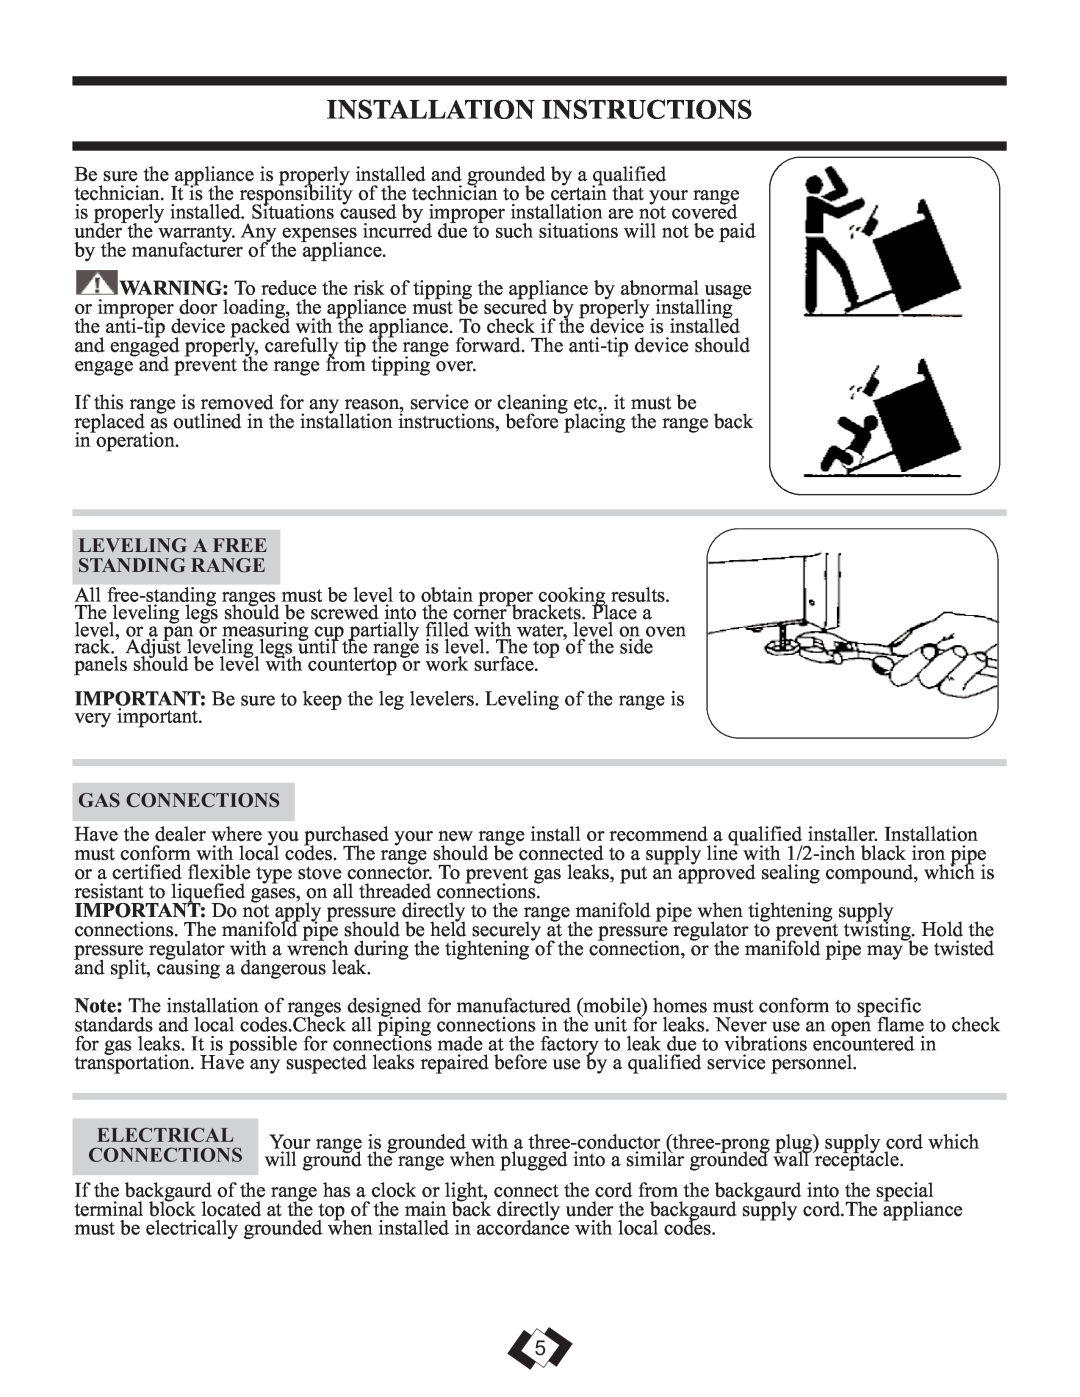 Danby DR3009WGLP Installation Instructions, Leveling A Free Standing Range, Gas Connections, Electrical 